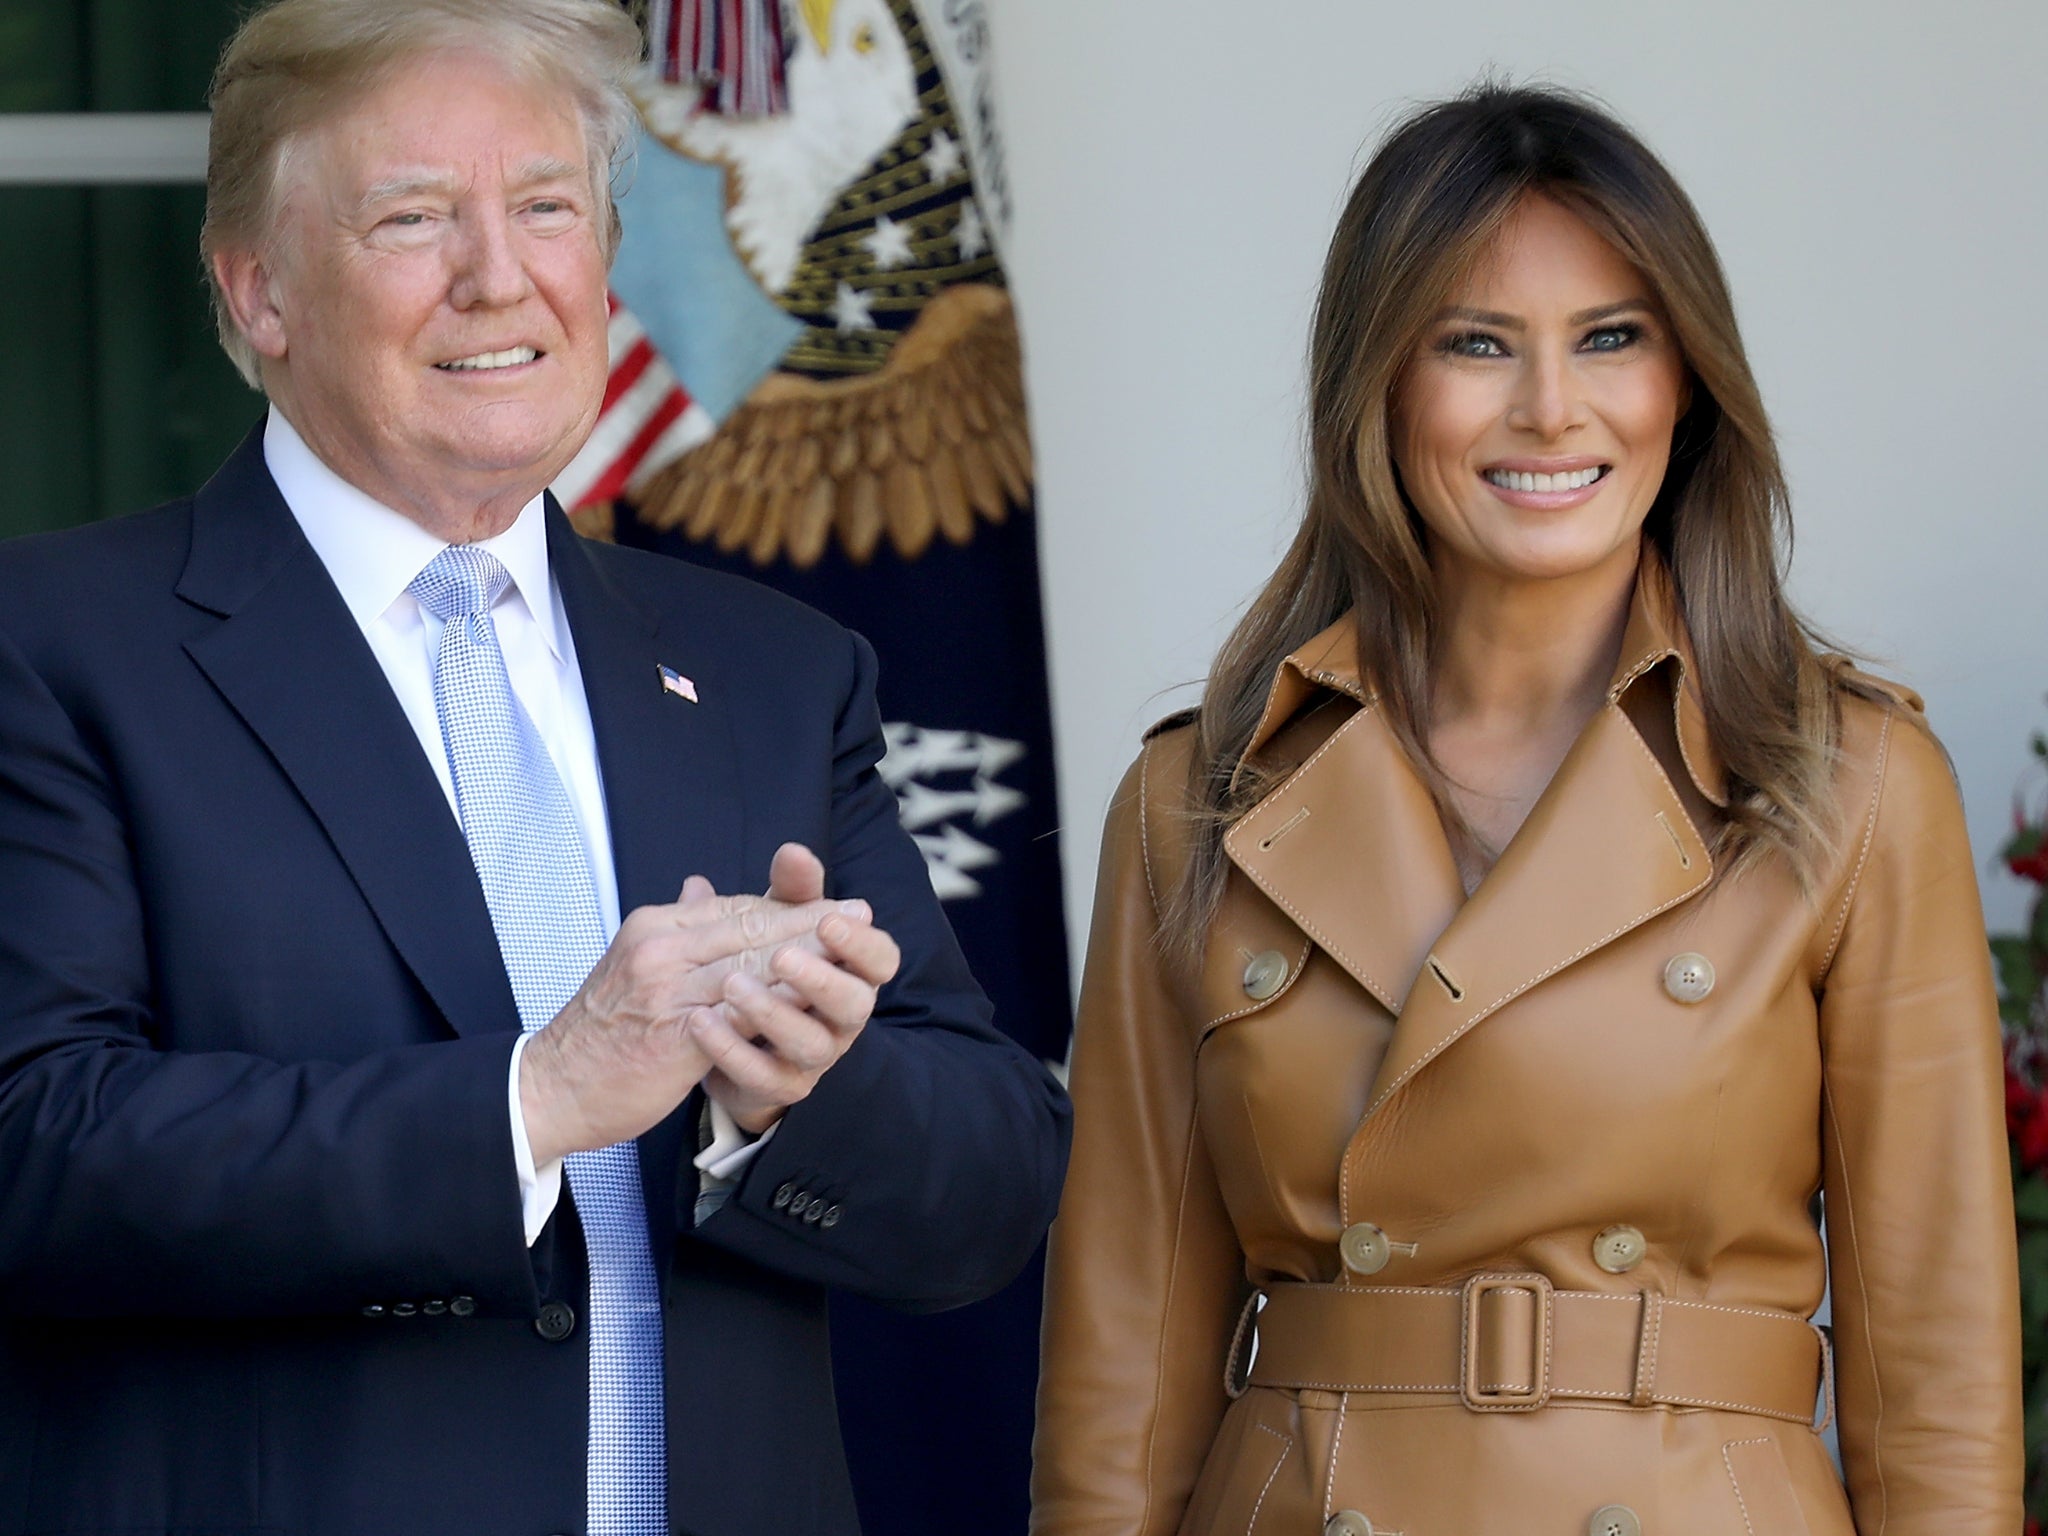 US President Donald Trump applauds after US first lady Melania Trump spoke in the Rose Garden of the White House on 7 May 2018 about the Be Best programme